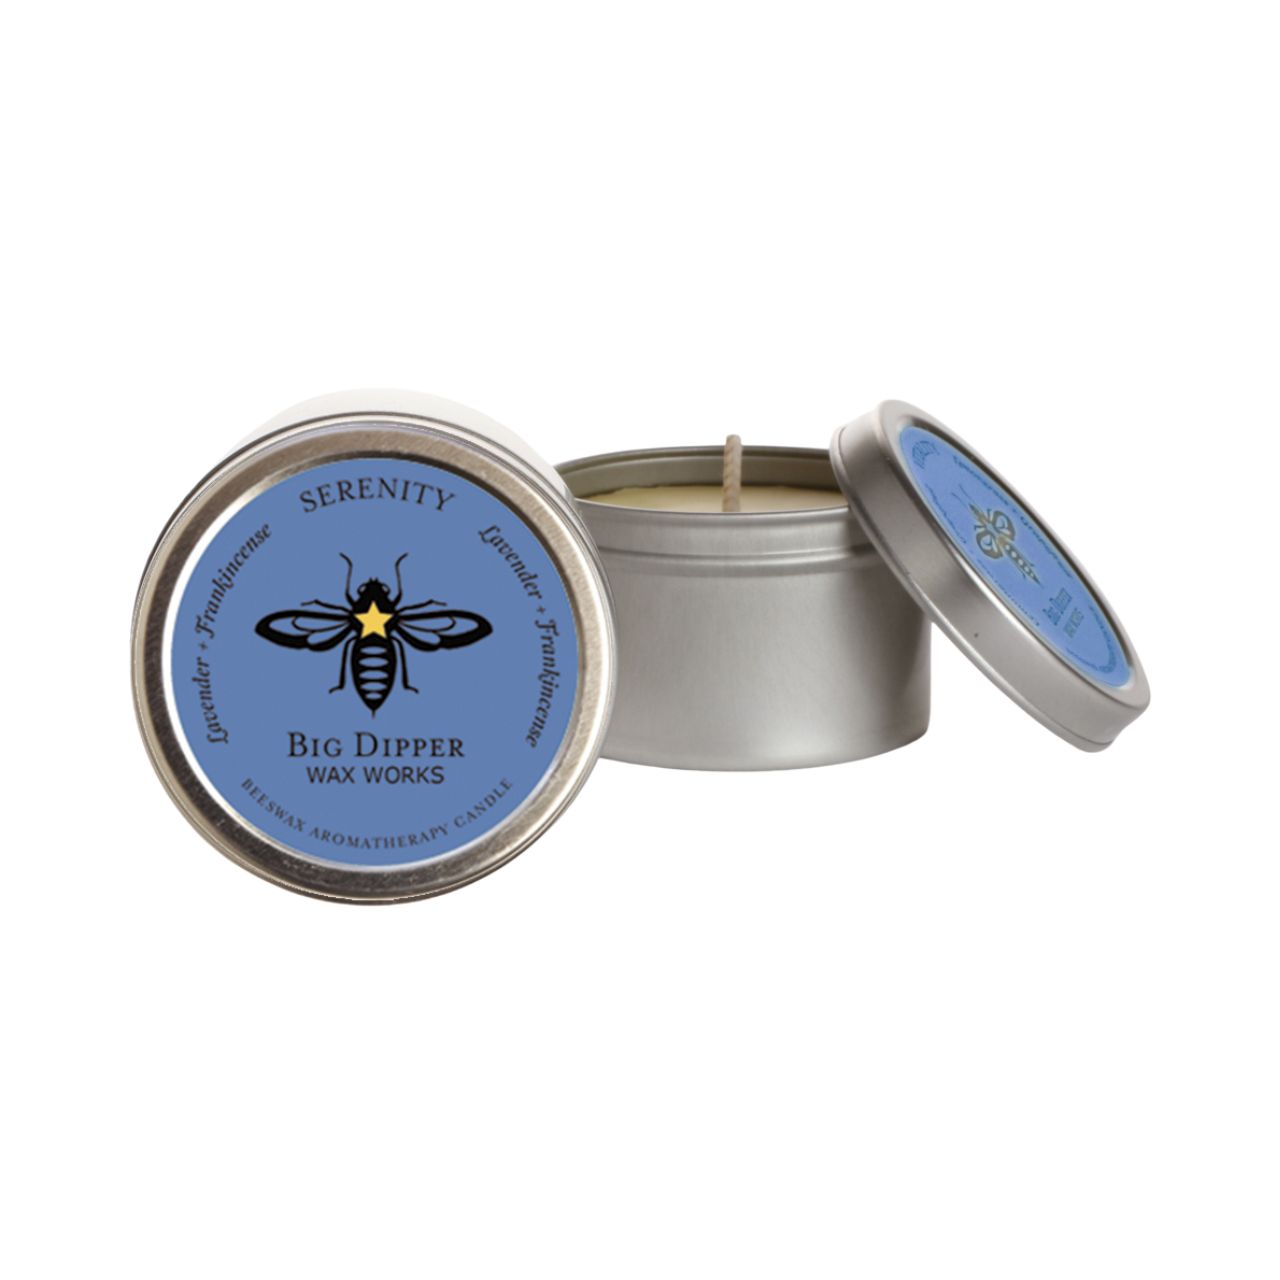 BDWW - Beeswax Aromatherapy Tin - Serenity - Frankincense and Lavender